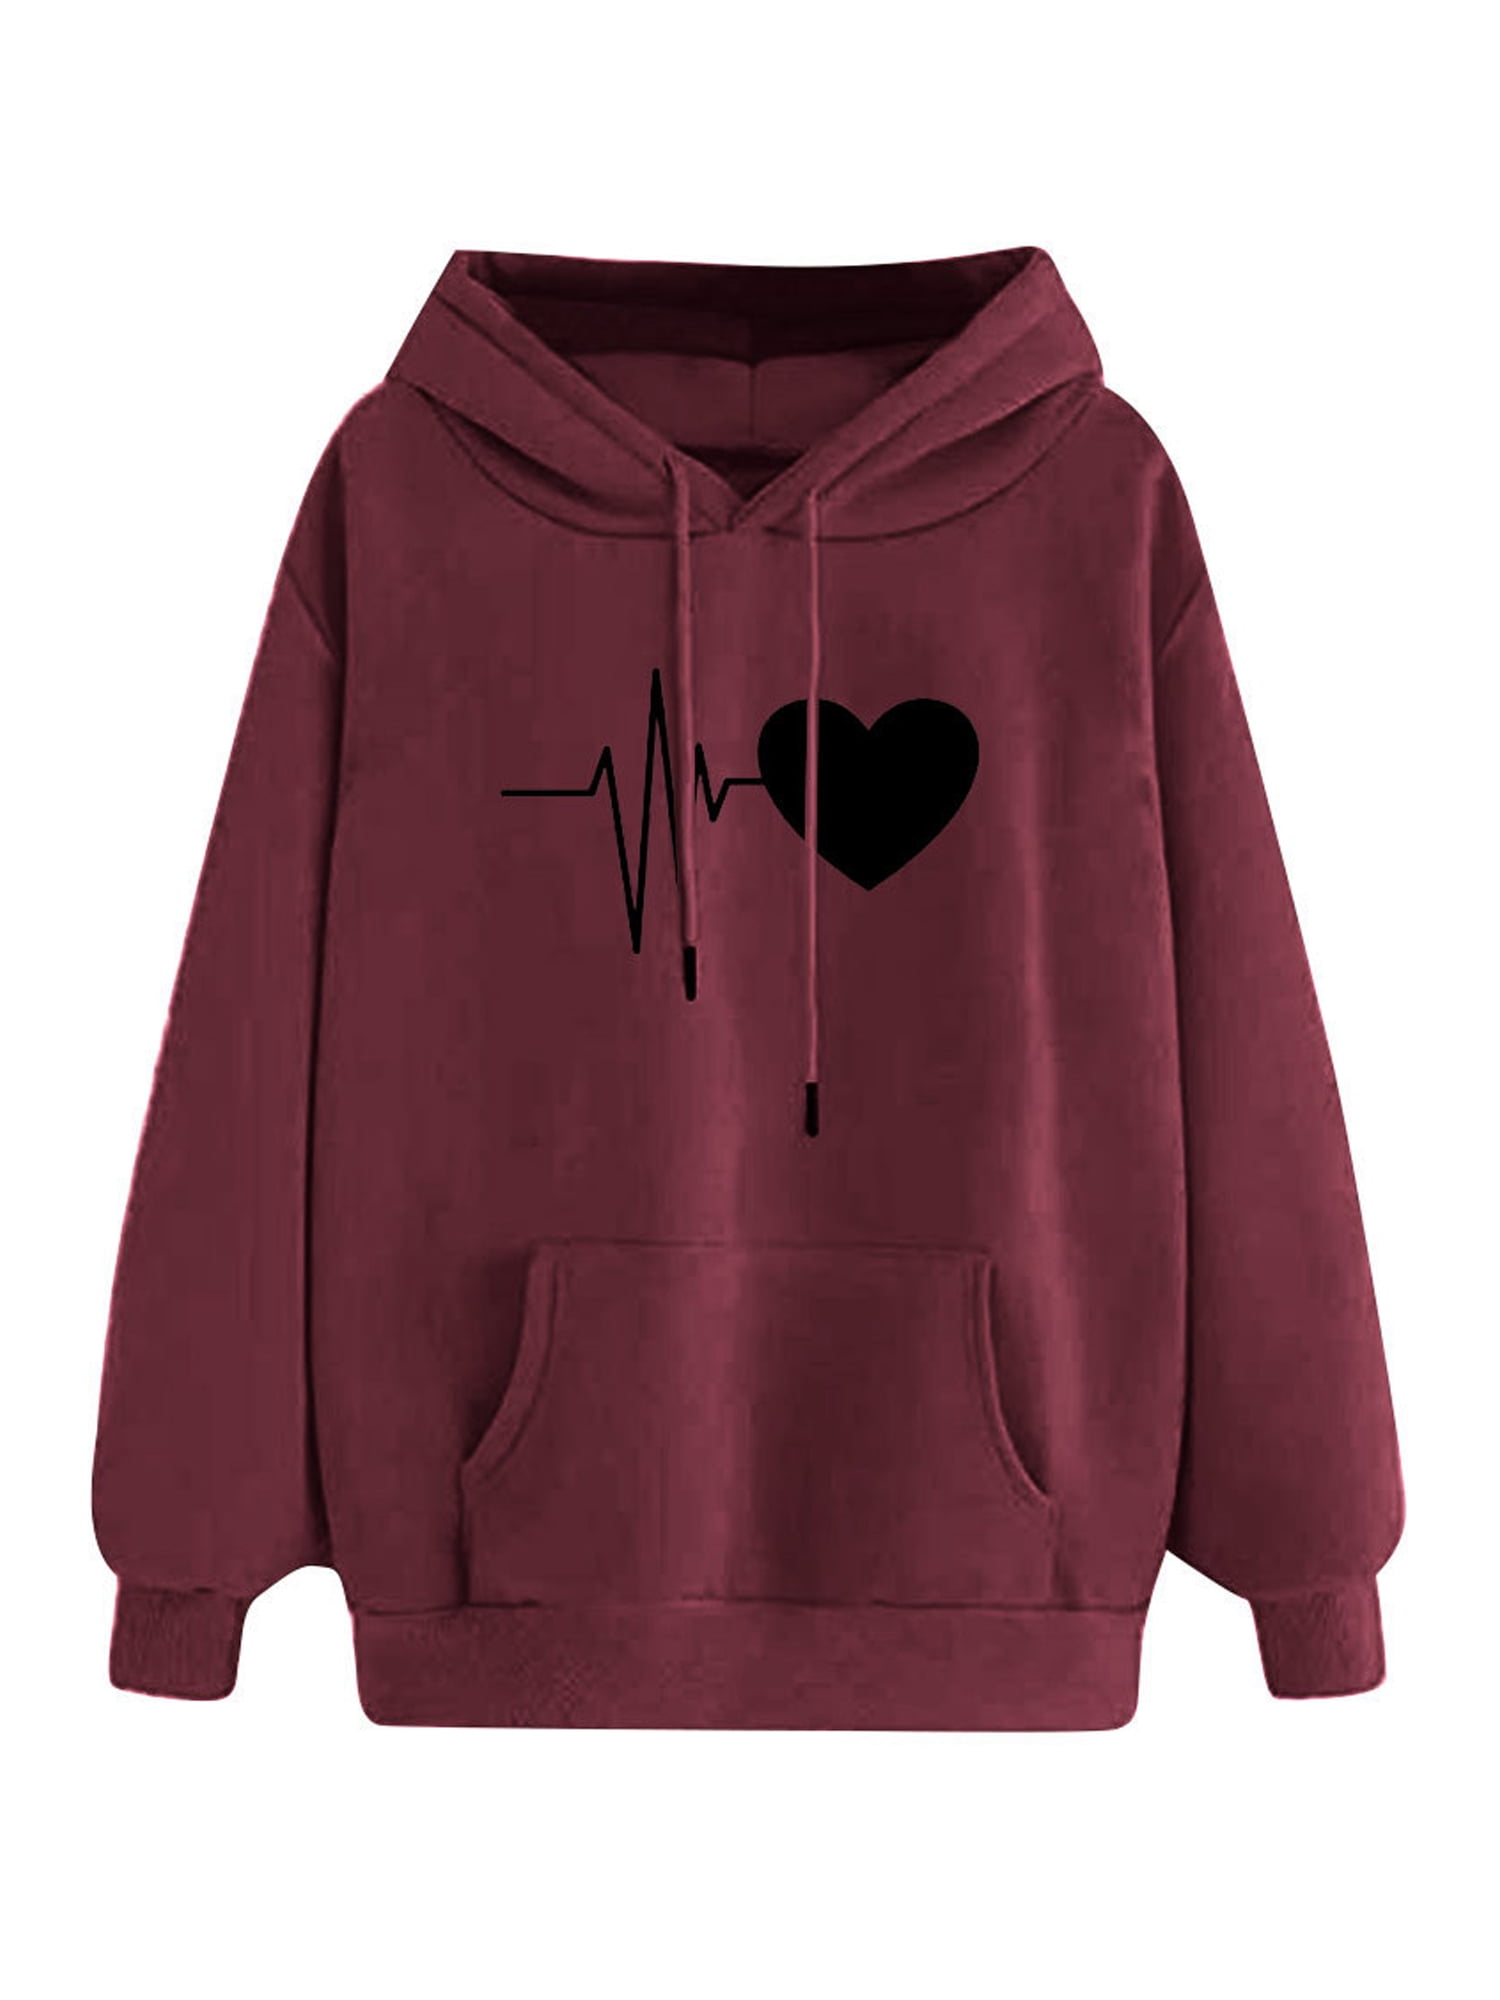 Bmnmsl Valentines Day Long Sleeve Hoodie Pullover Couple Matching ...